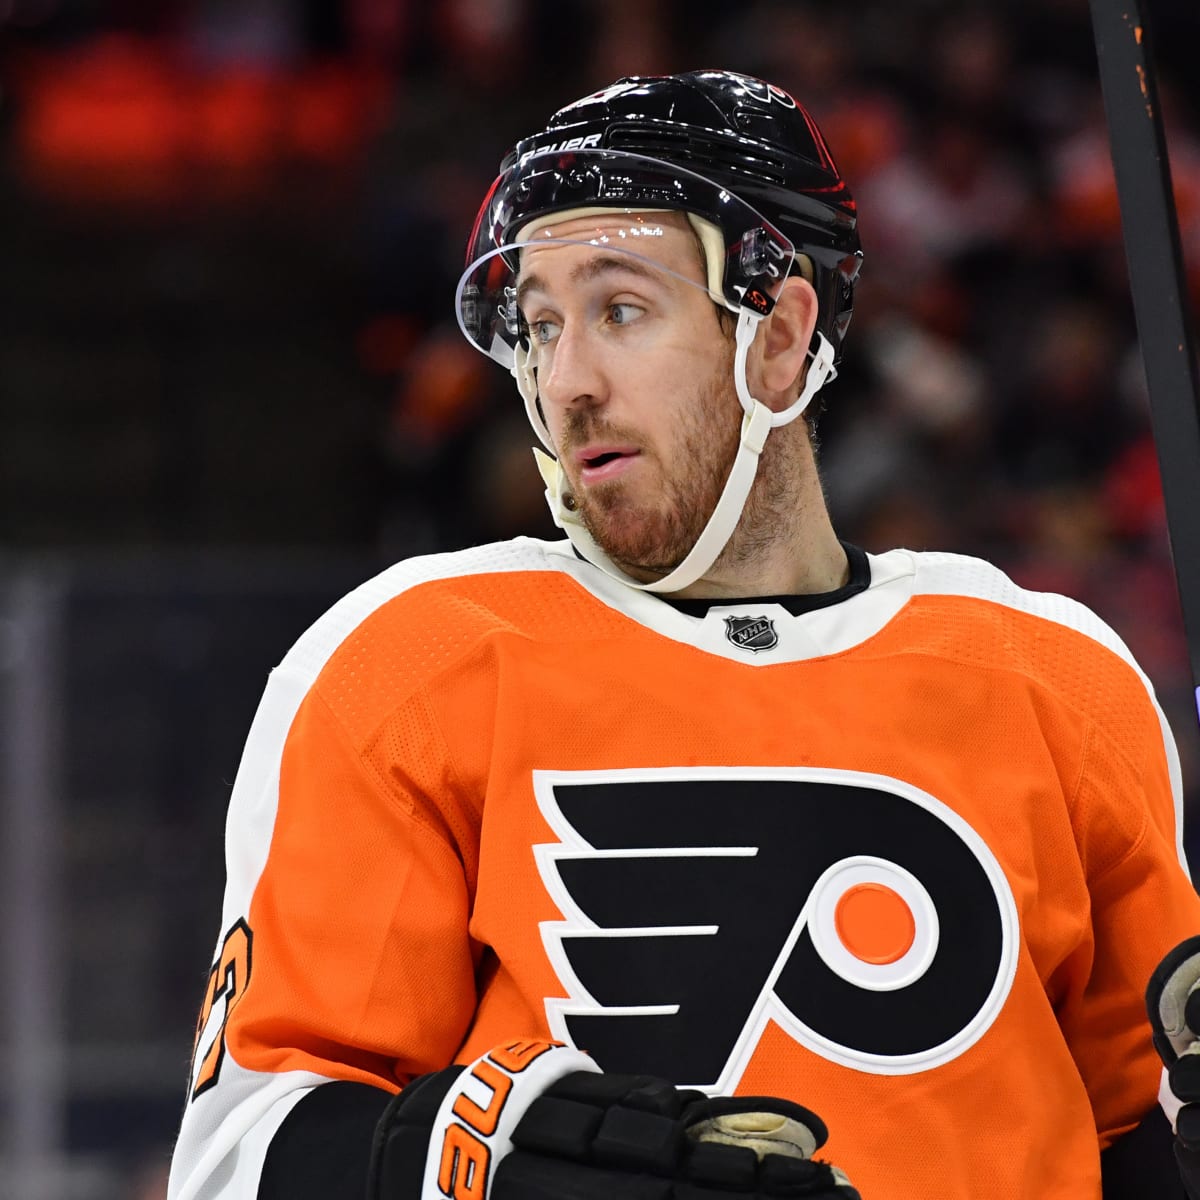 Kevin Hayes Finally Traded, Sent to St. Louis Blues for 6th Round